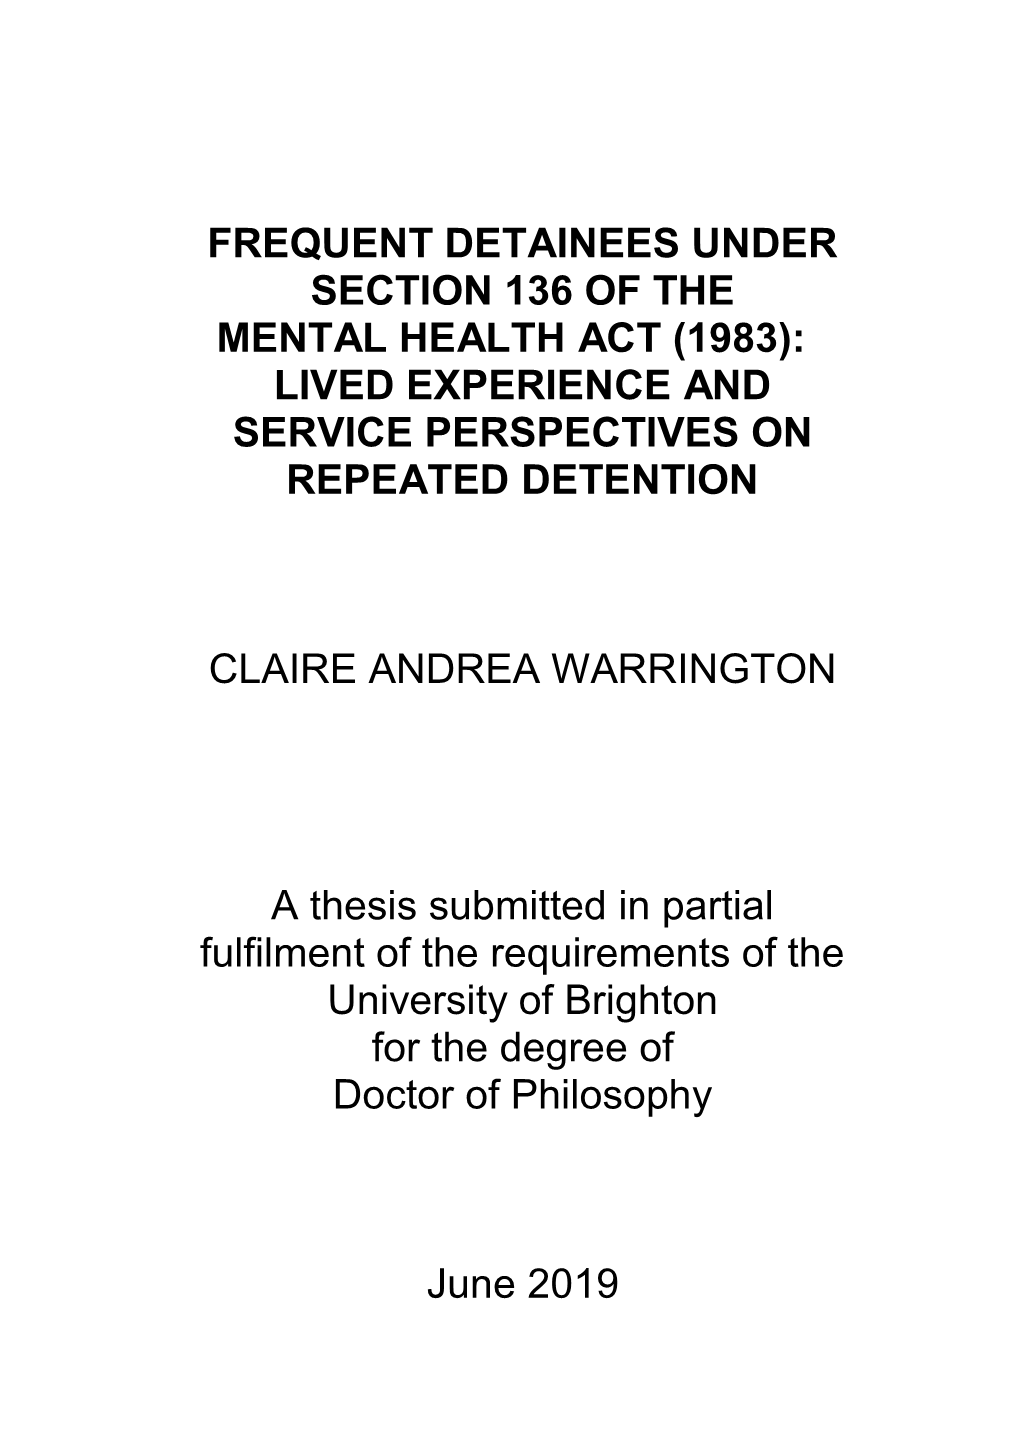 Frequent Detainees Under Section 136 of the Mental Health Act (1983): Lived Experience and Service Perspectives on Repeated Detention